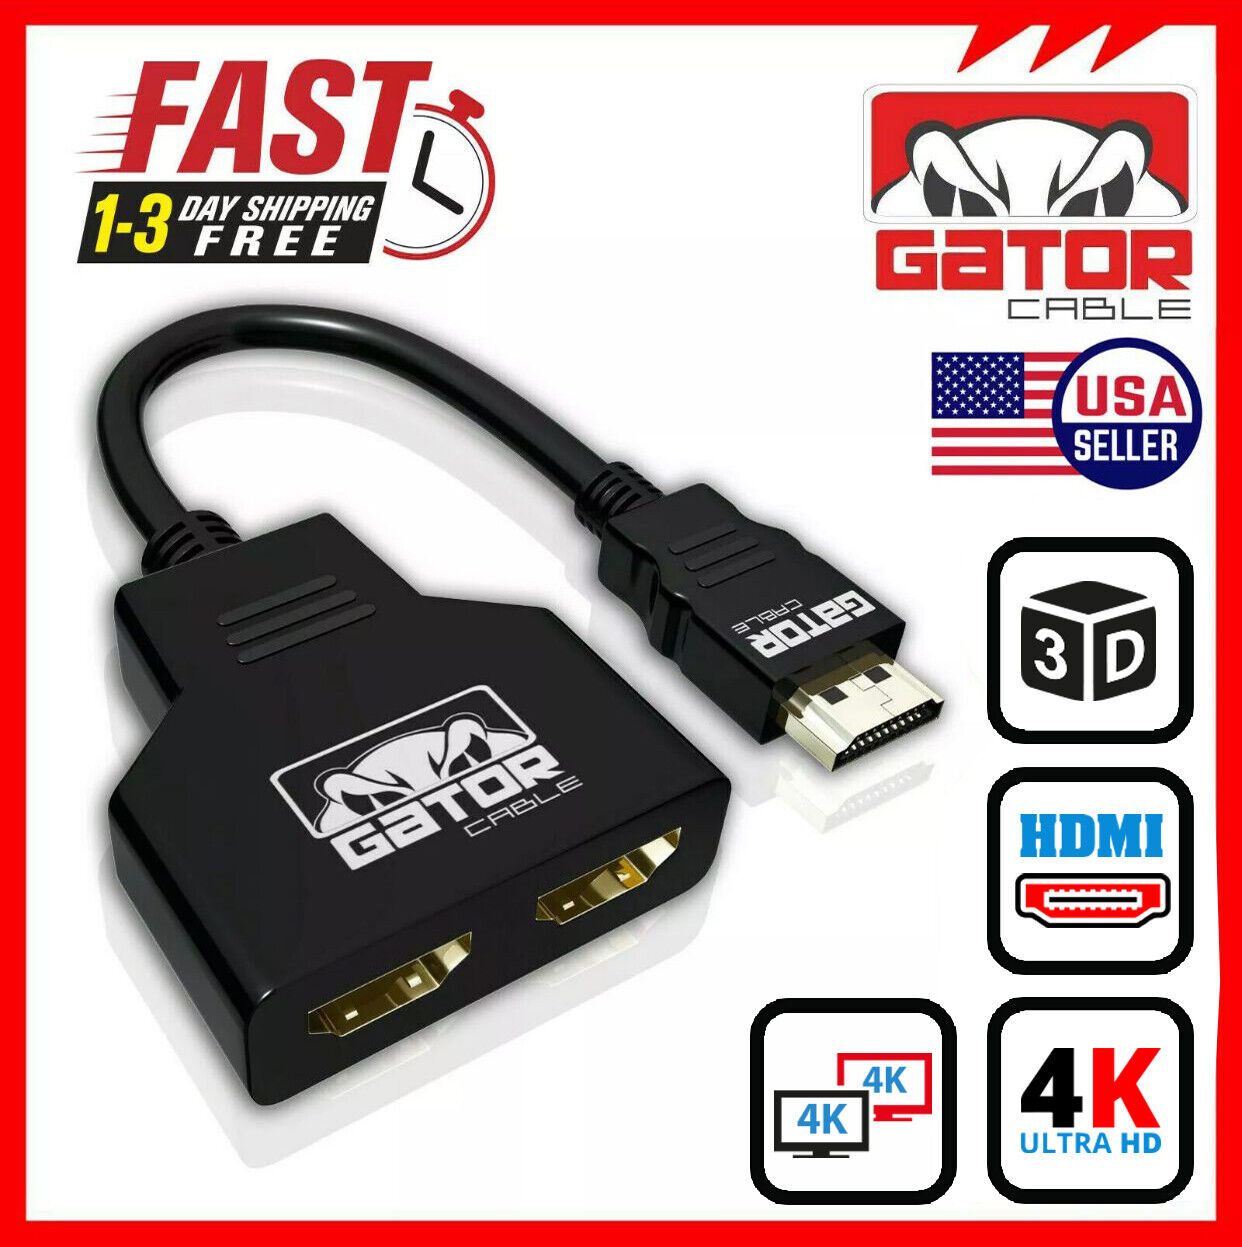 4K HDMI Cable Splitter Adapter 2.0 Converter 1 In 2 Out HDMI Male to 2 HDMI UHD